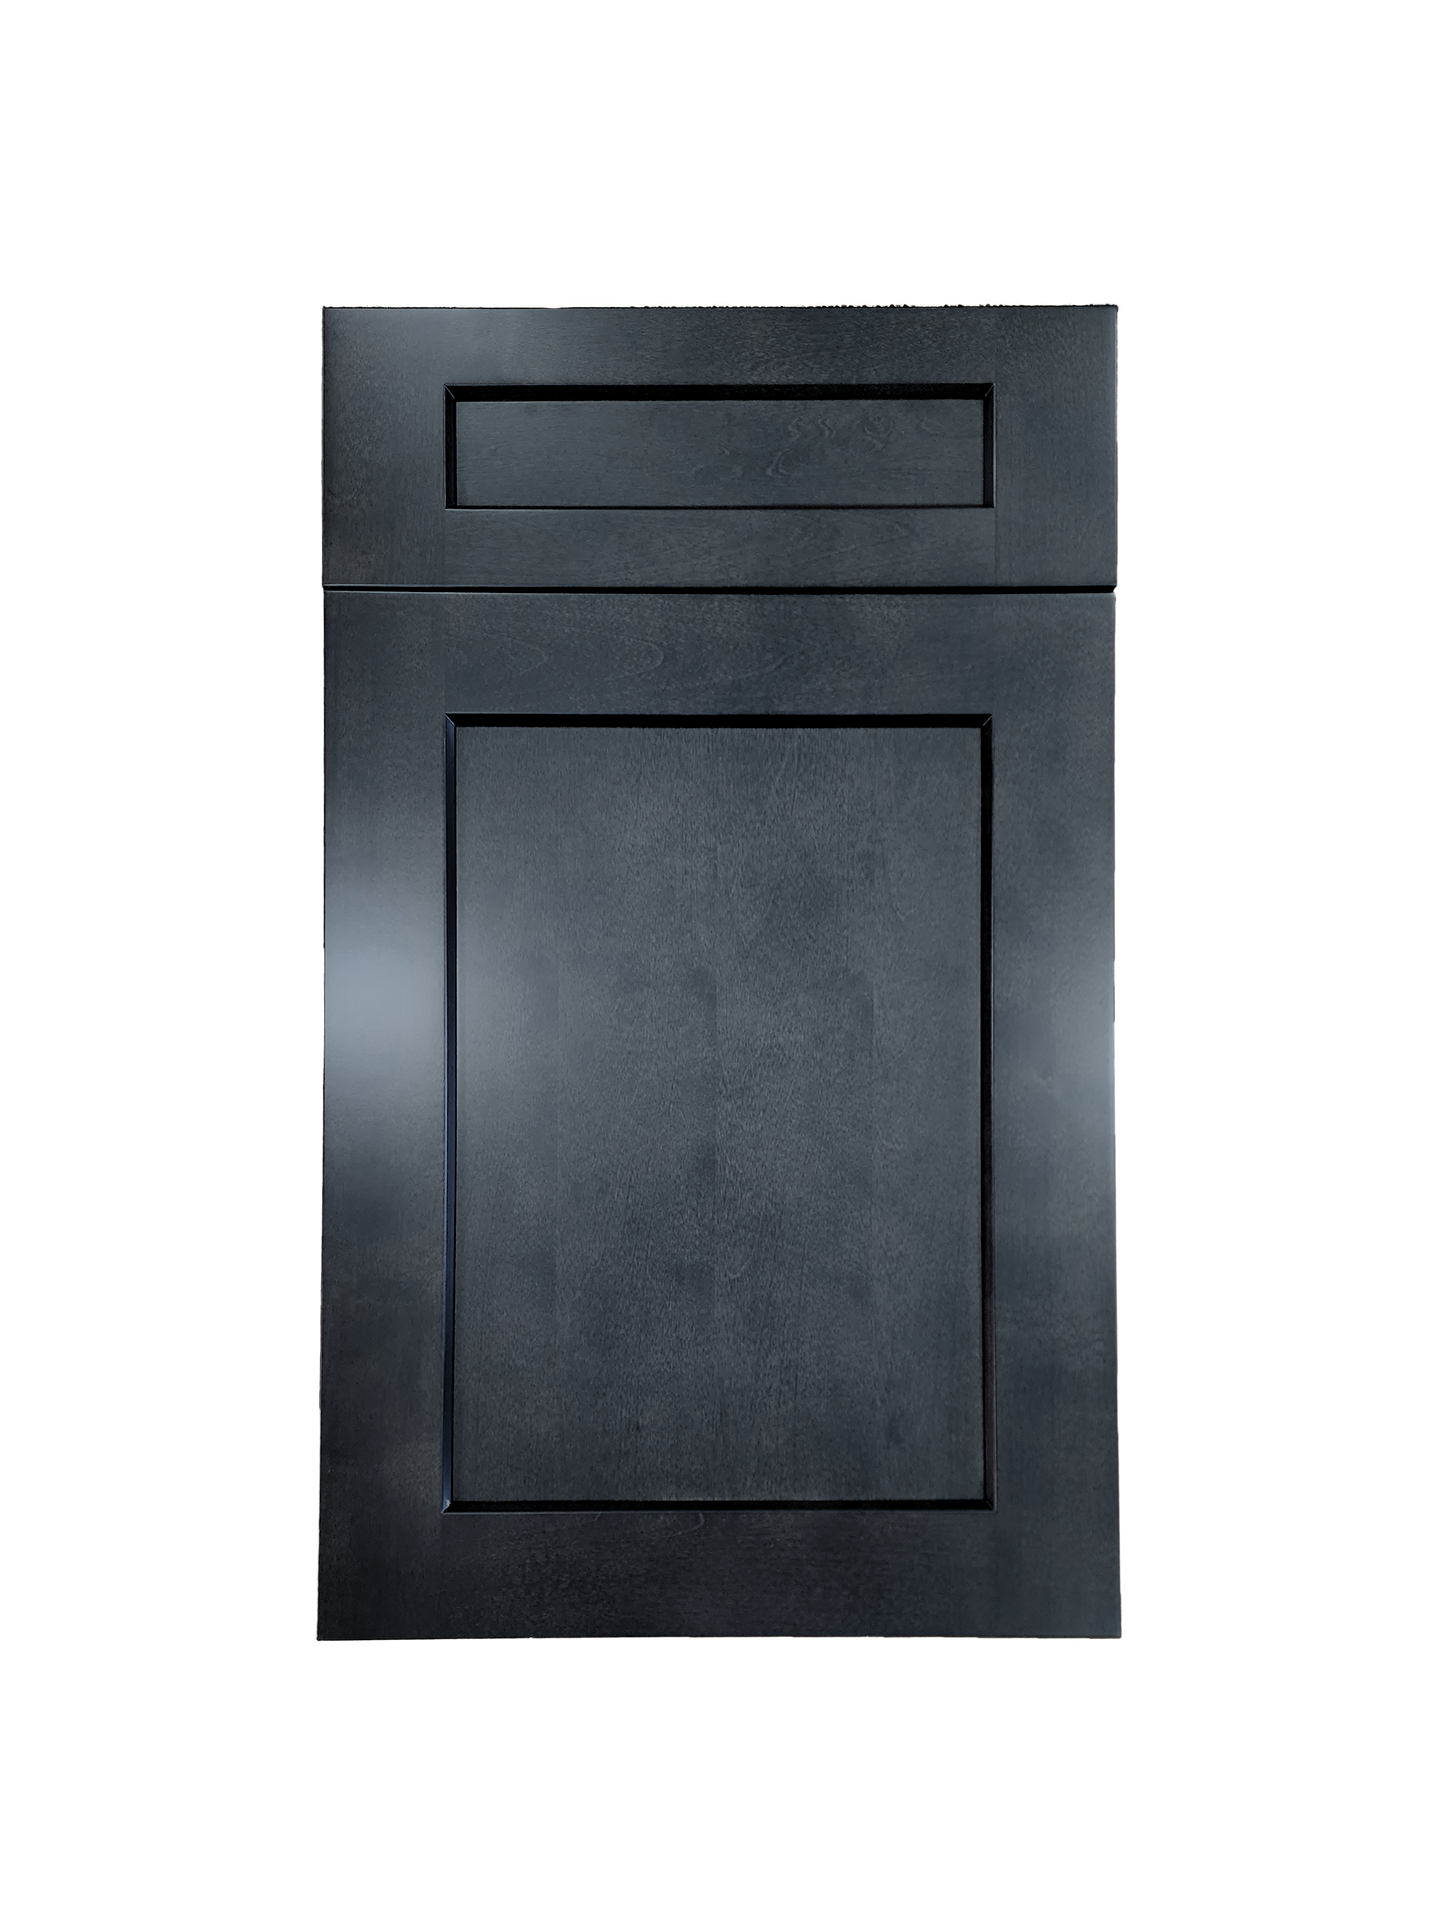 Stormy Grey Base Cabinet 30 inches wide 24 inches deep 34.5 inches tall with Stormy Grey box and Stormy Grey doors